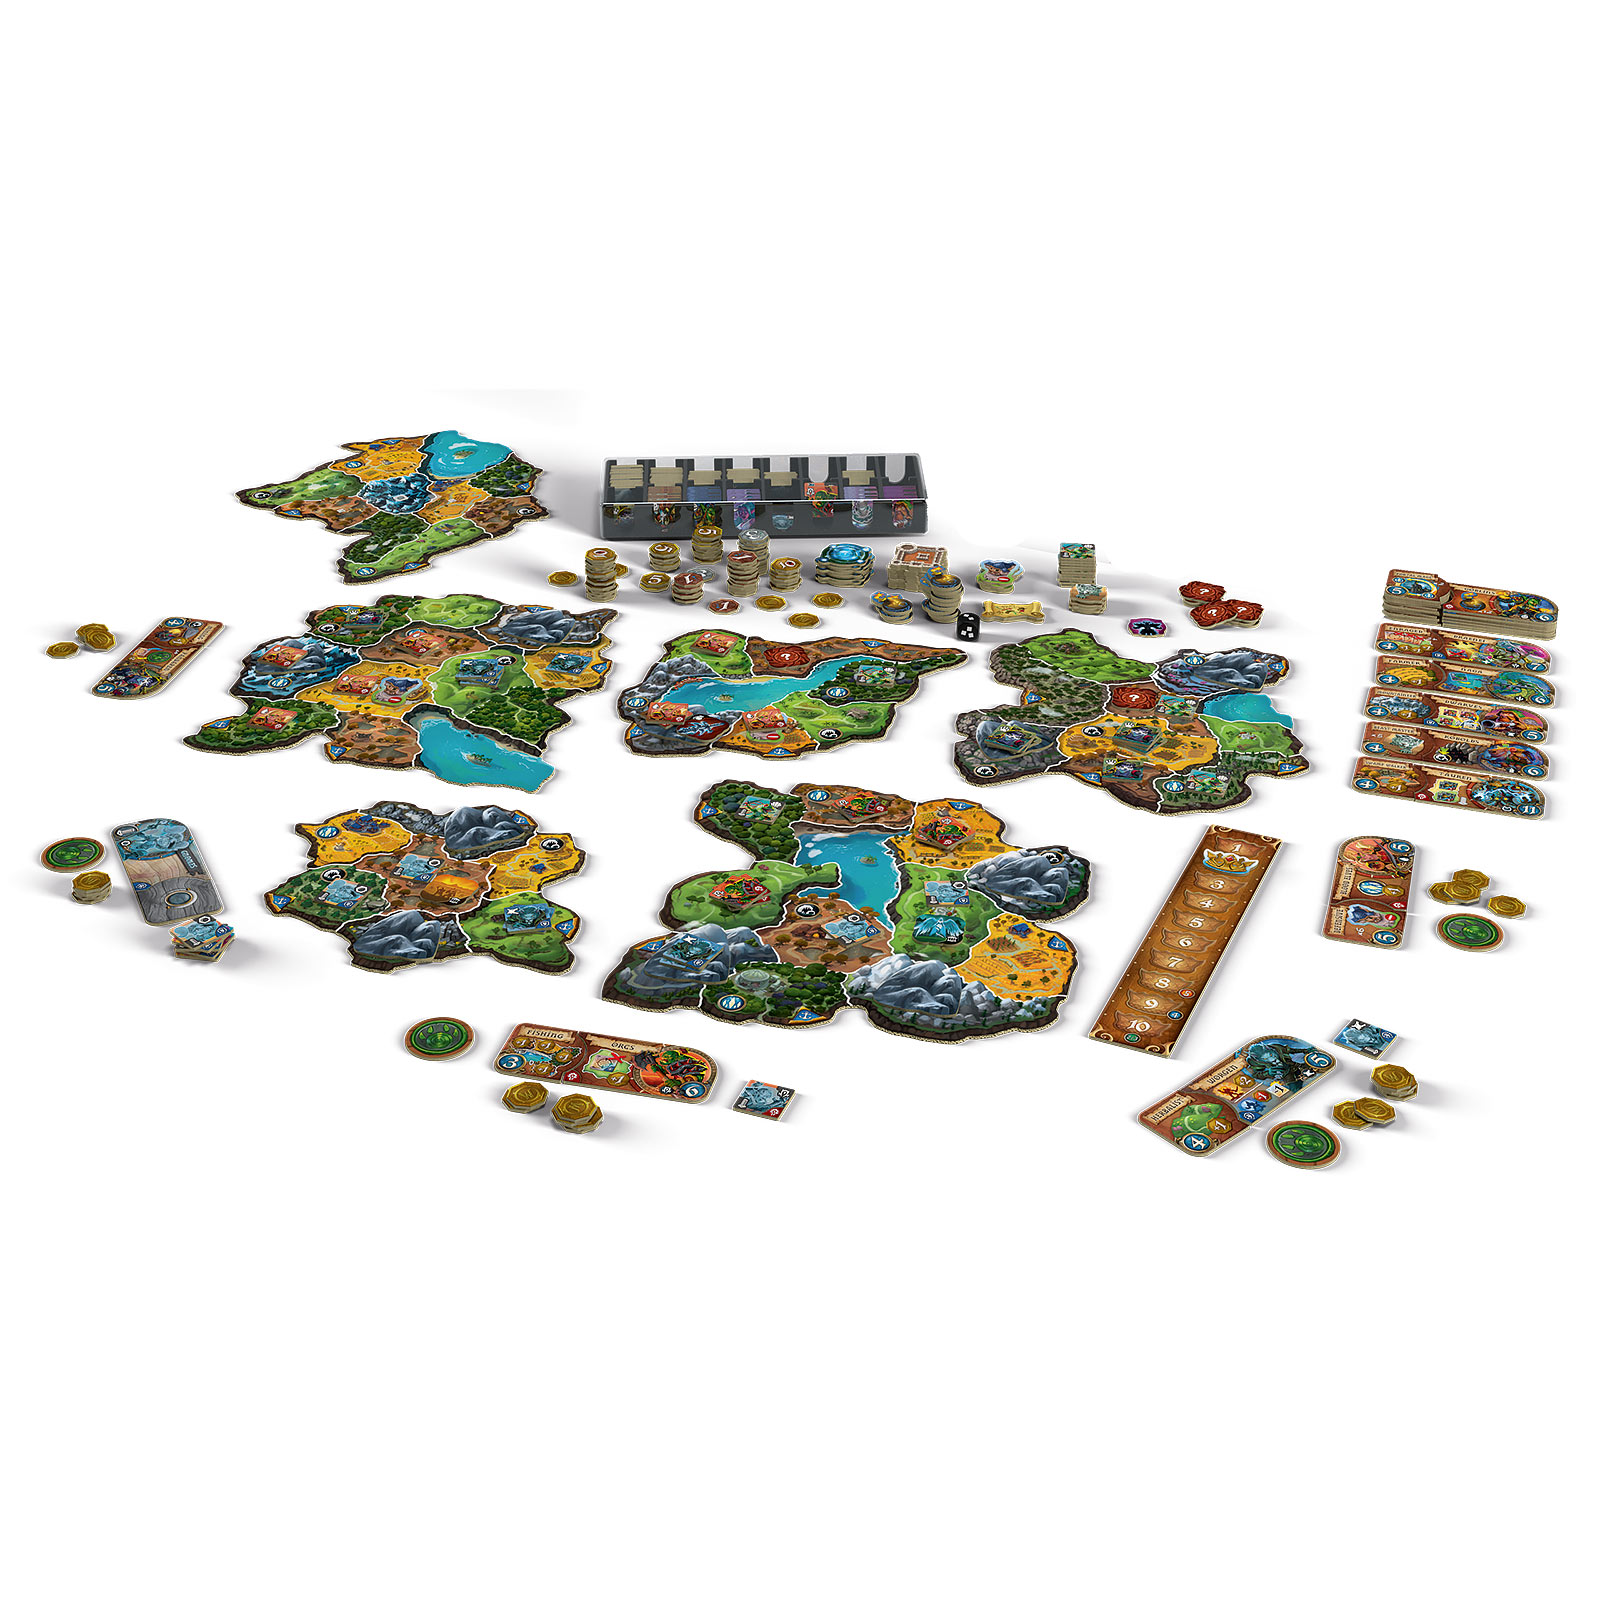 Small World of Warcraft - Battle for Azeroth Board Game